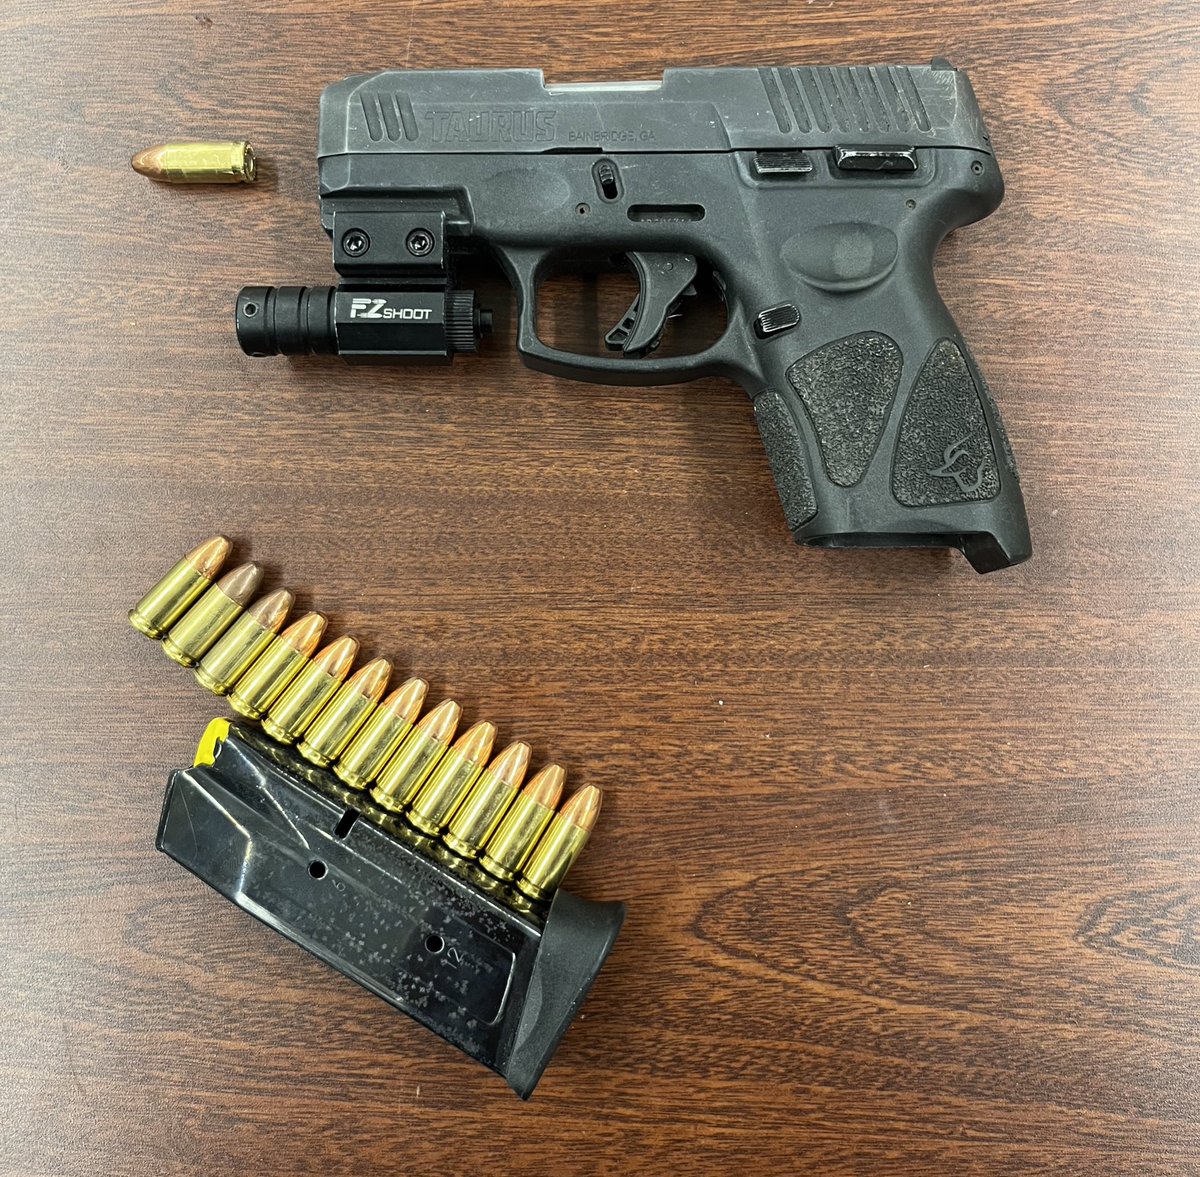 Great job by 50th Precinct Public Safety Team officers who were able to effect an arrest of an individual in possession of a loaded firearm in the area of West 262nd street and Broadway.